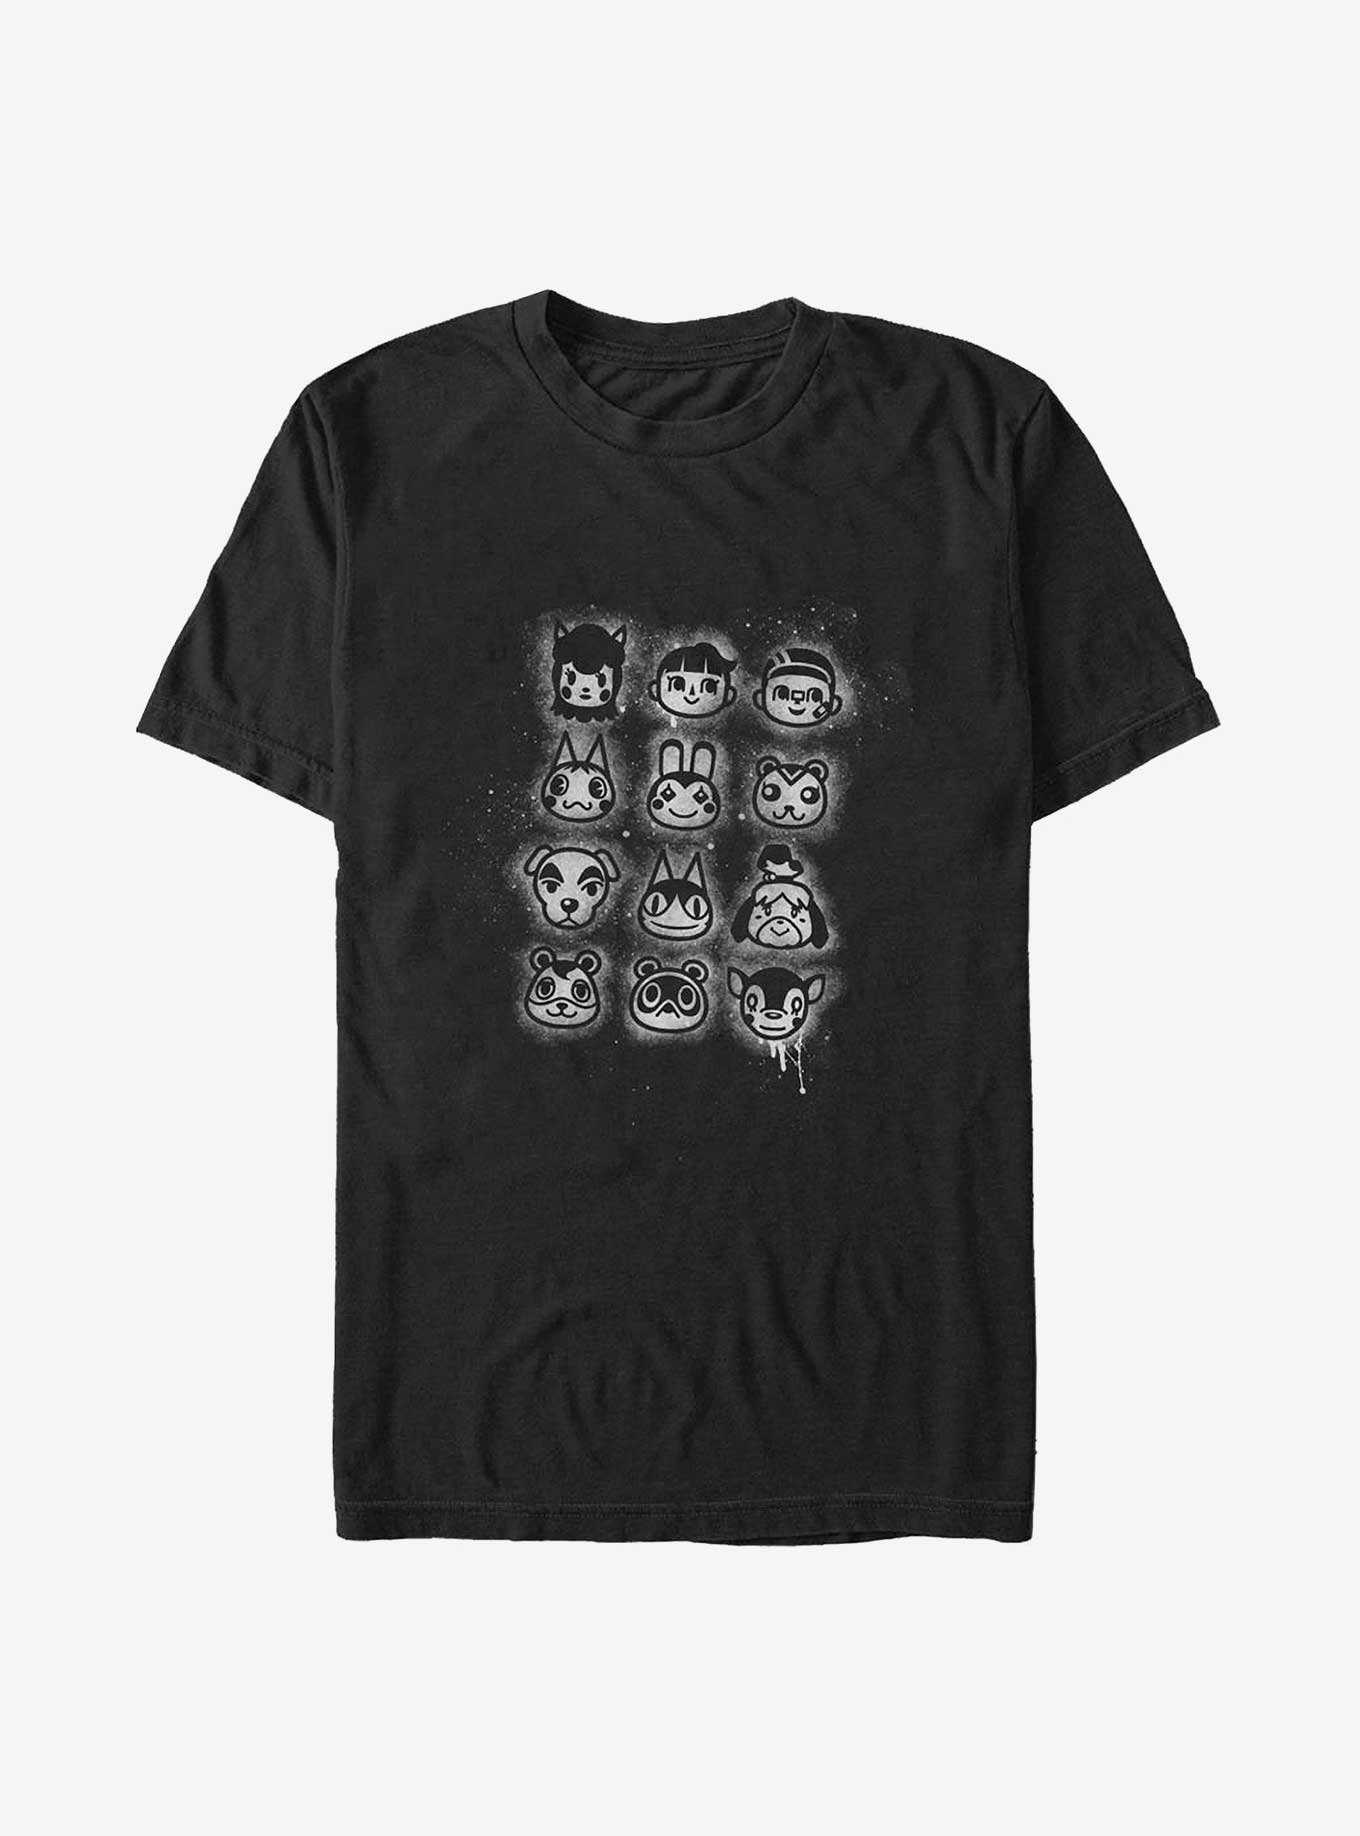 Animal Crossing The Villagers Big & Tall T-Shirt, , hi-res